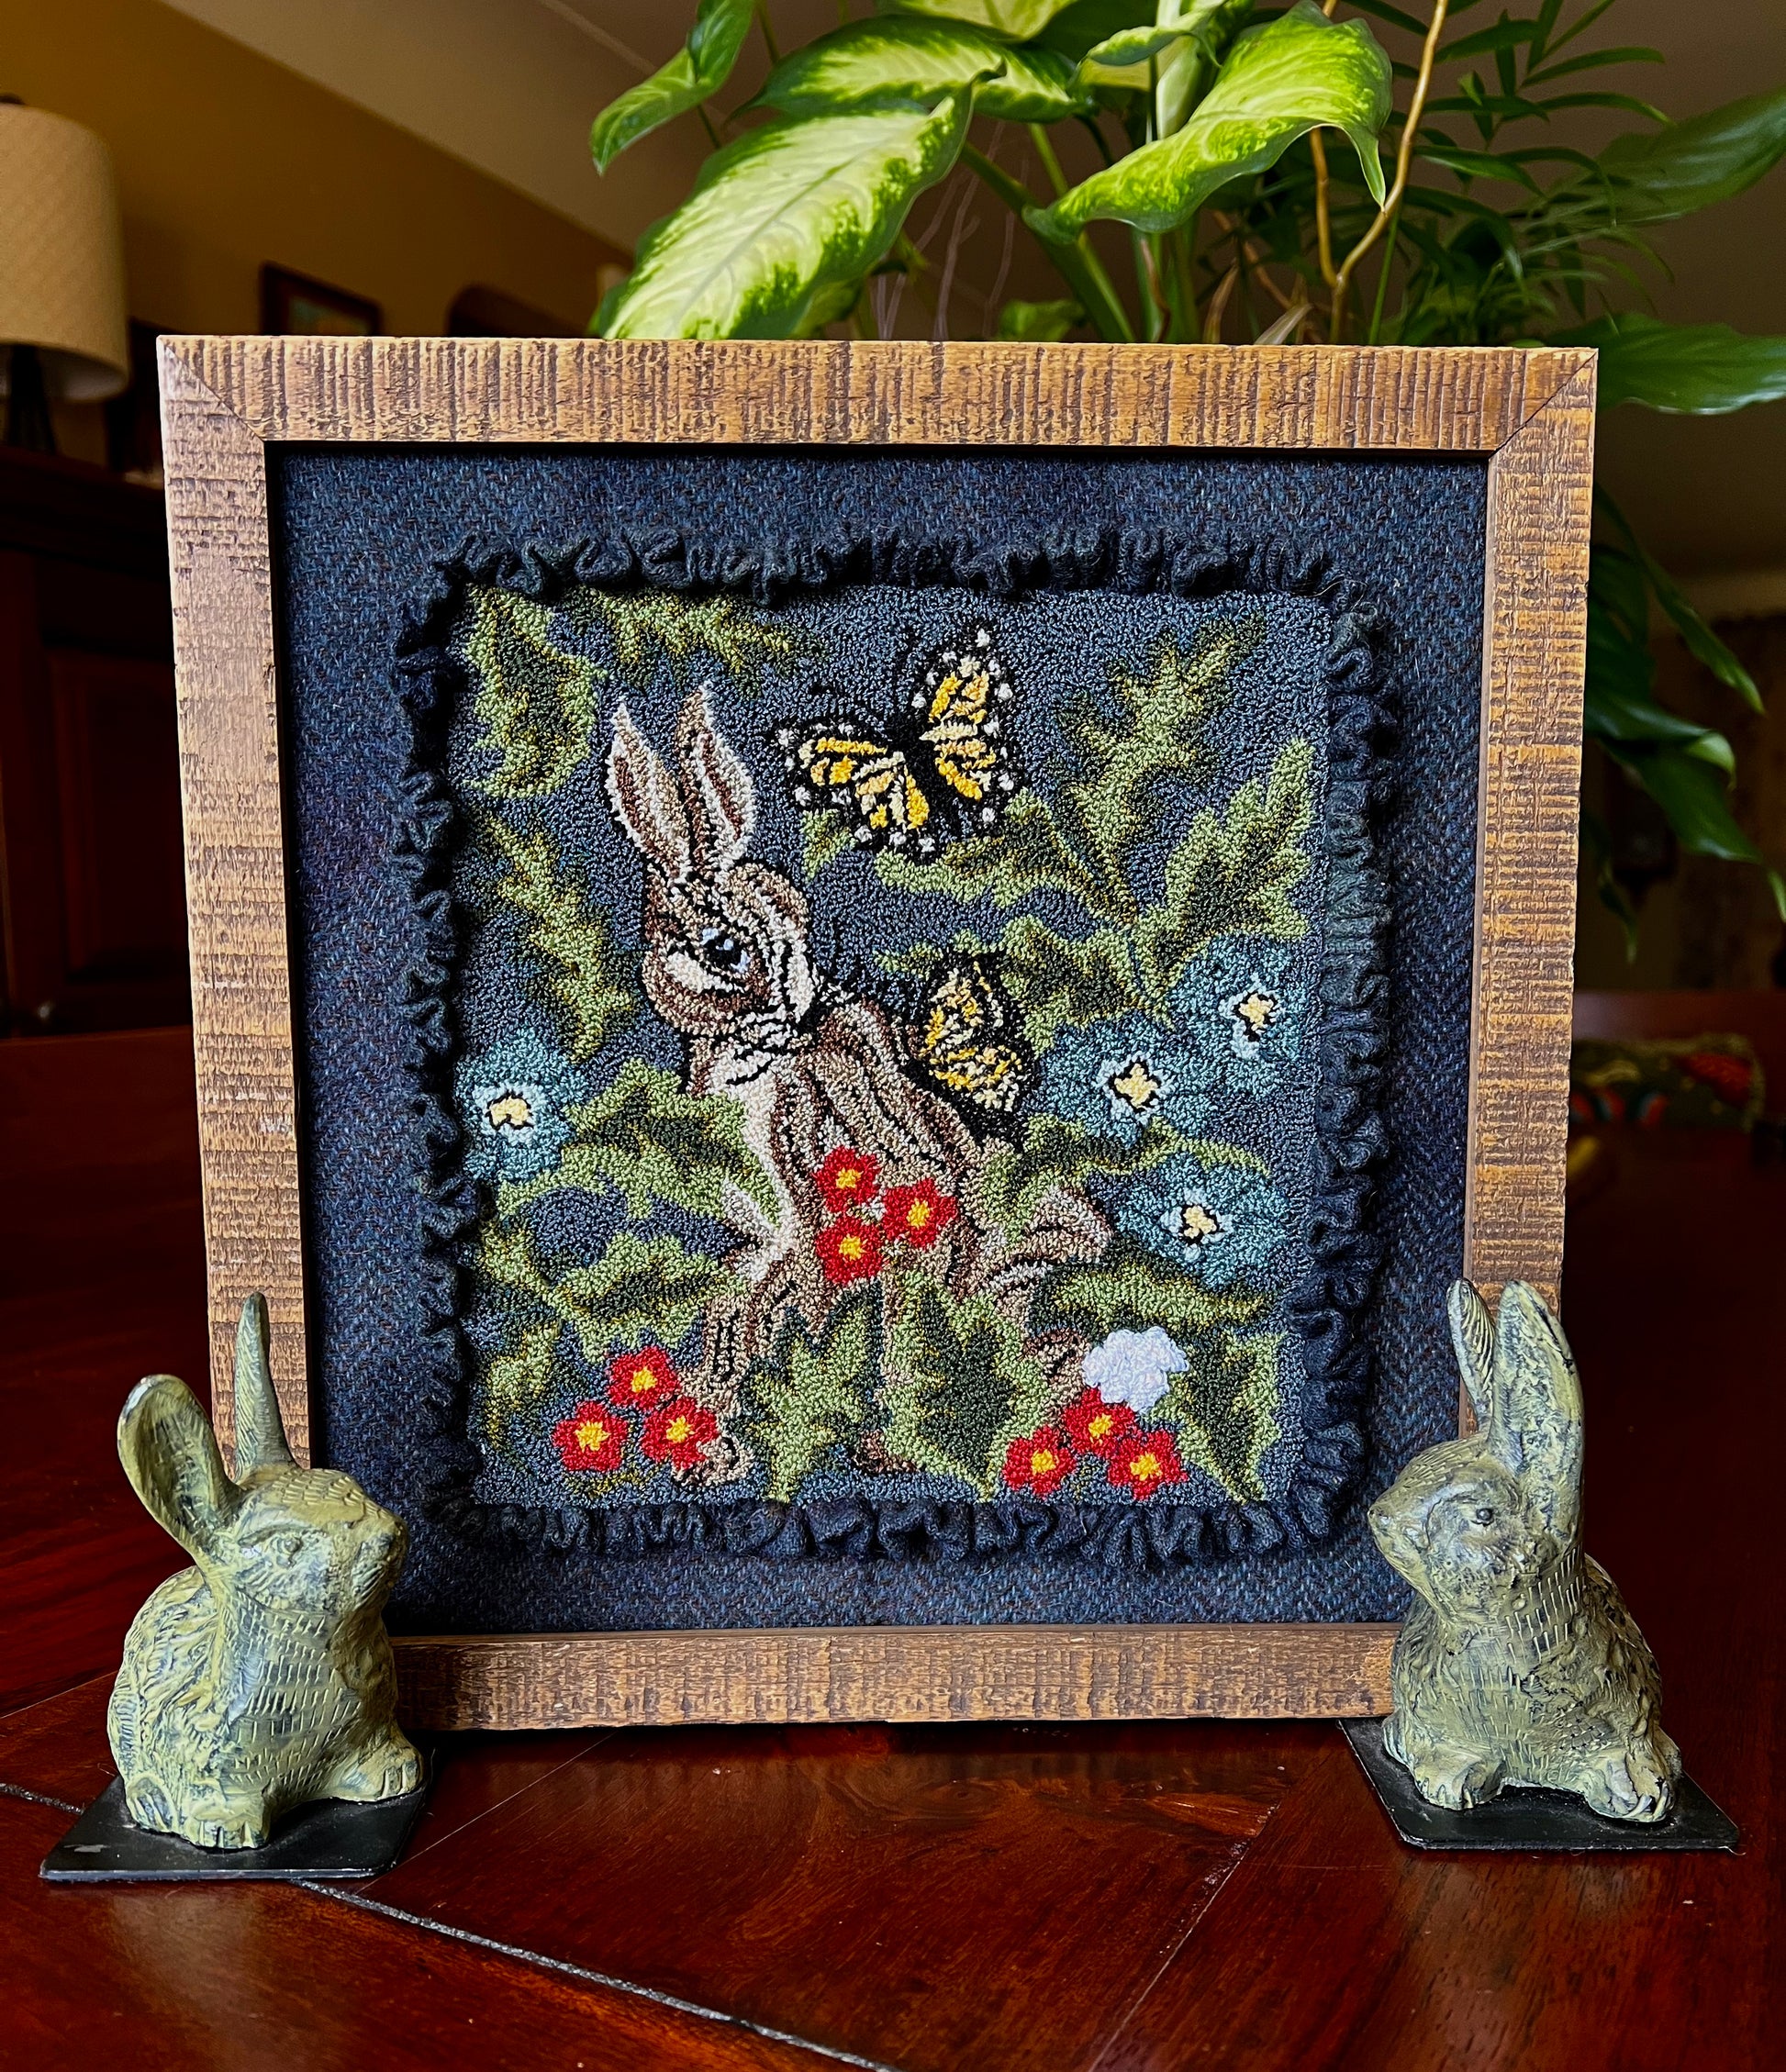 Hare with Friends PDF Digital Download Punch Needle Pattern by Orphaned Wool. This design is for anyone that loves bunnies and butterflies. This bunny is nestled in with flowers and foliage. makes a stunning finished design. DMC Floss was used in pattern.